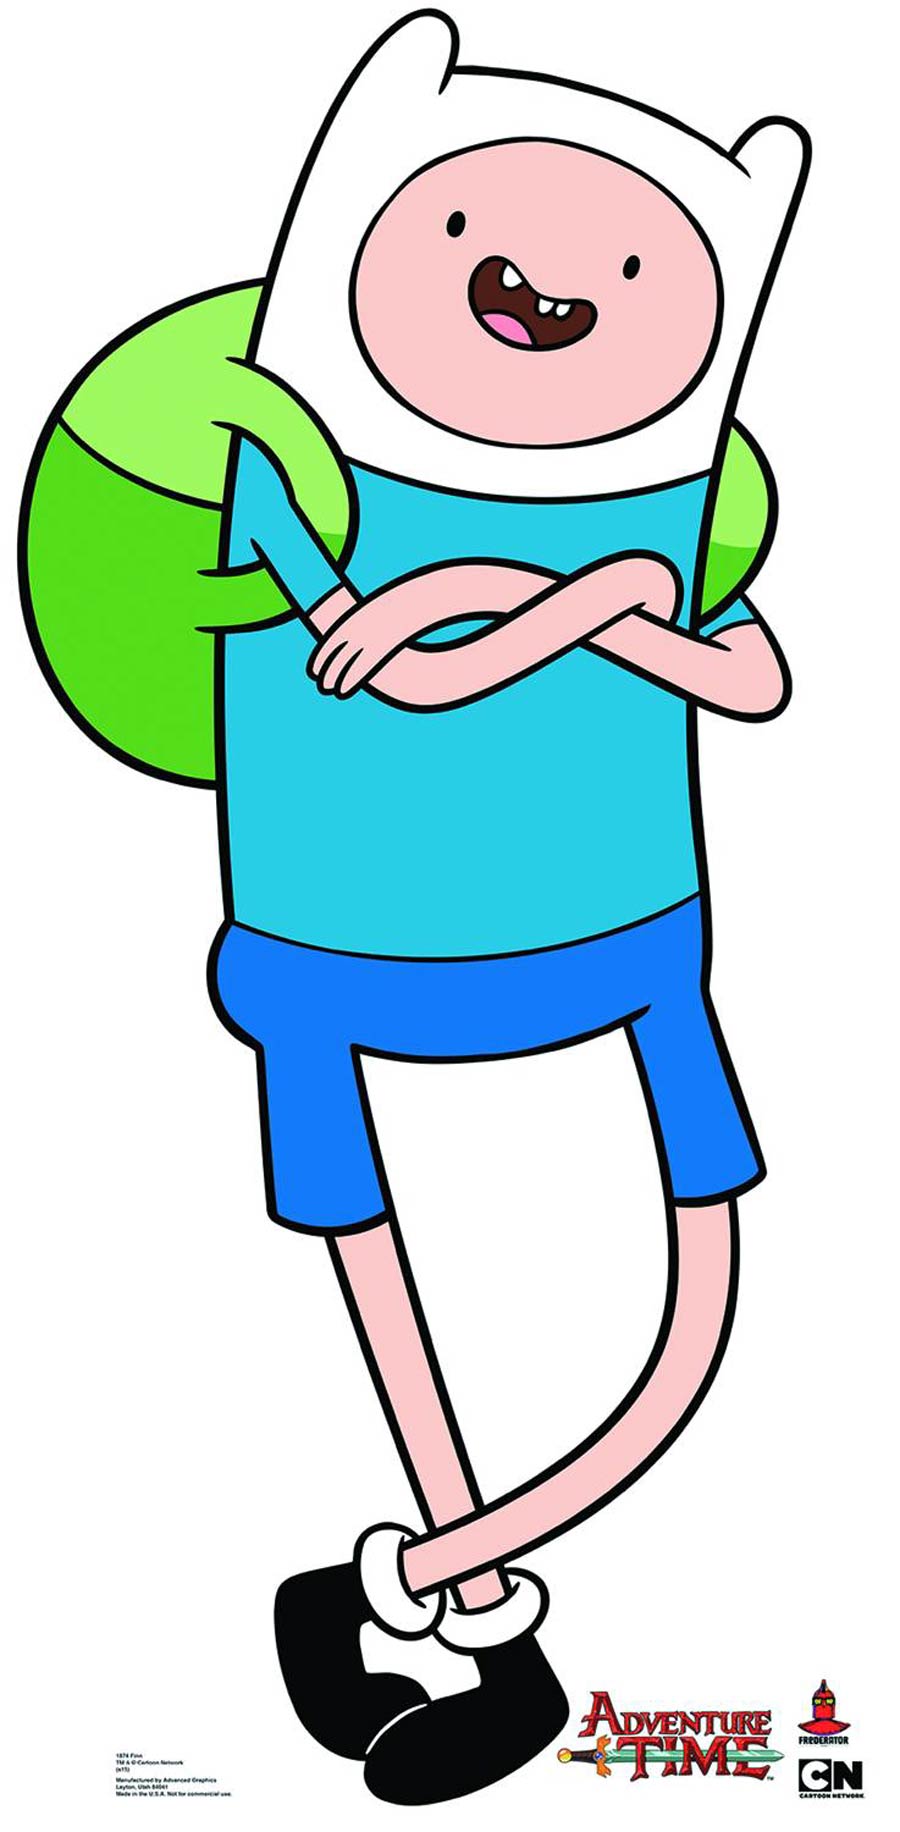 Adventure Time Life-Size Stand-Up - Finn